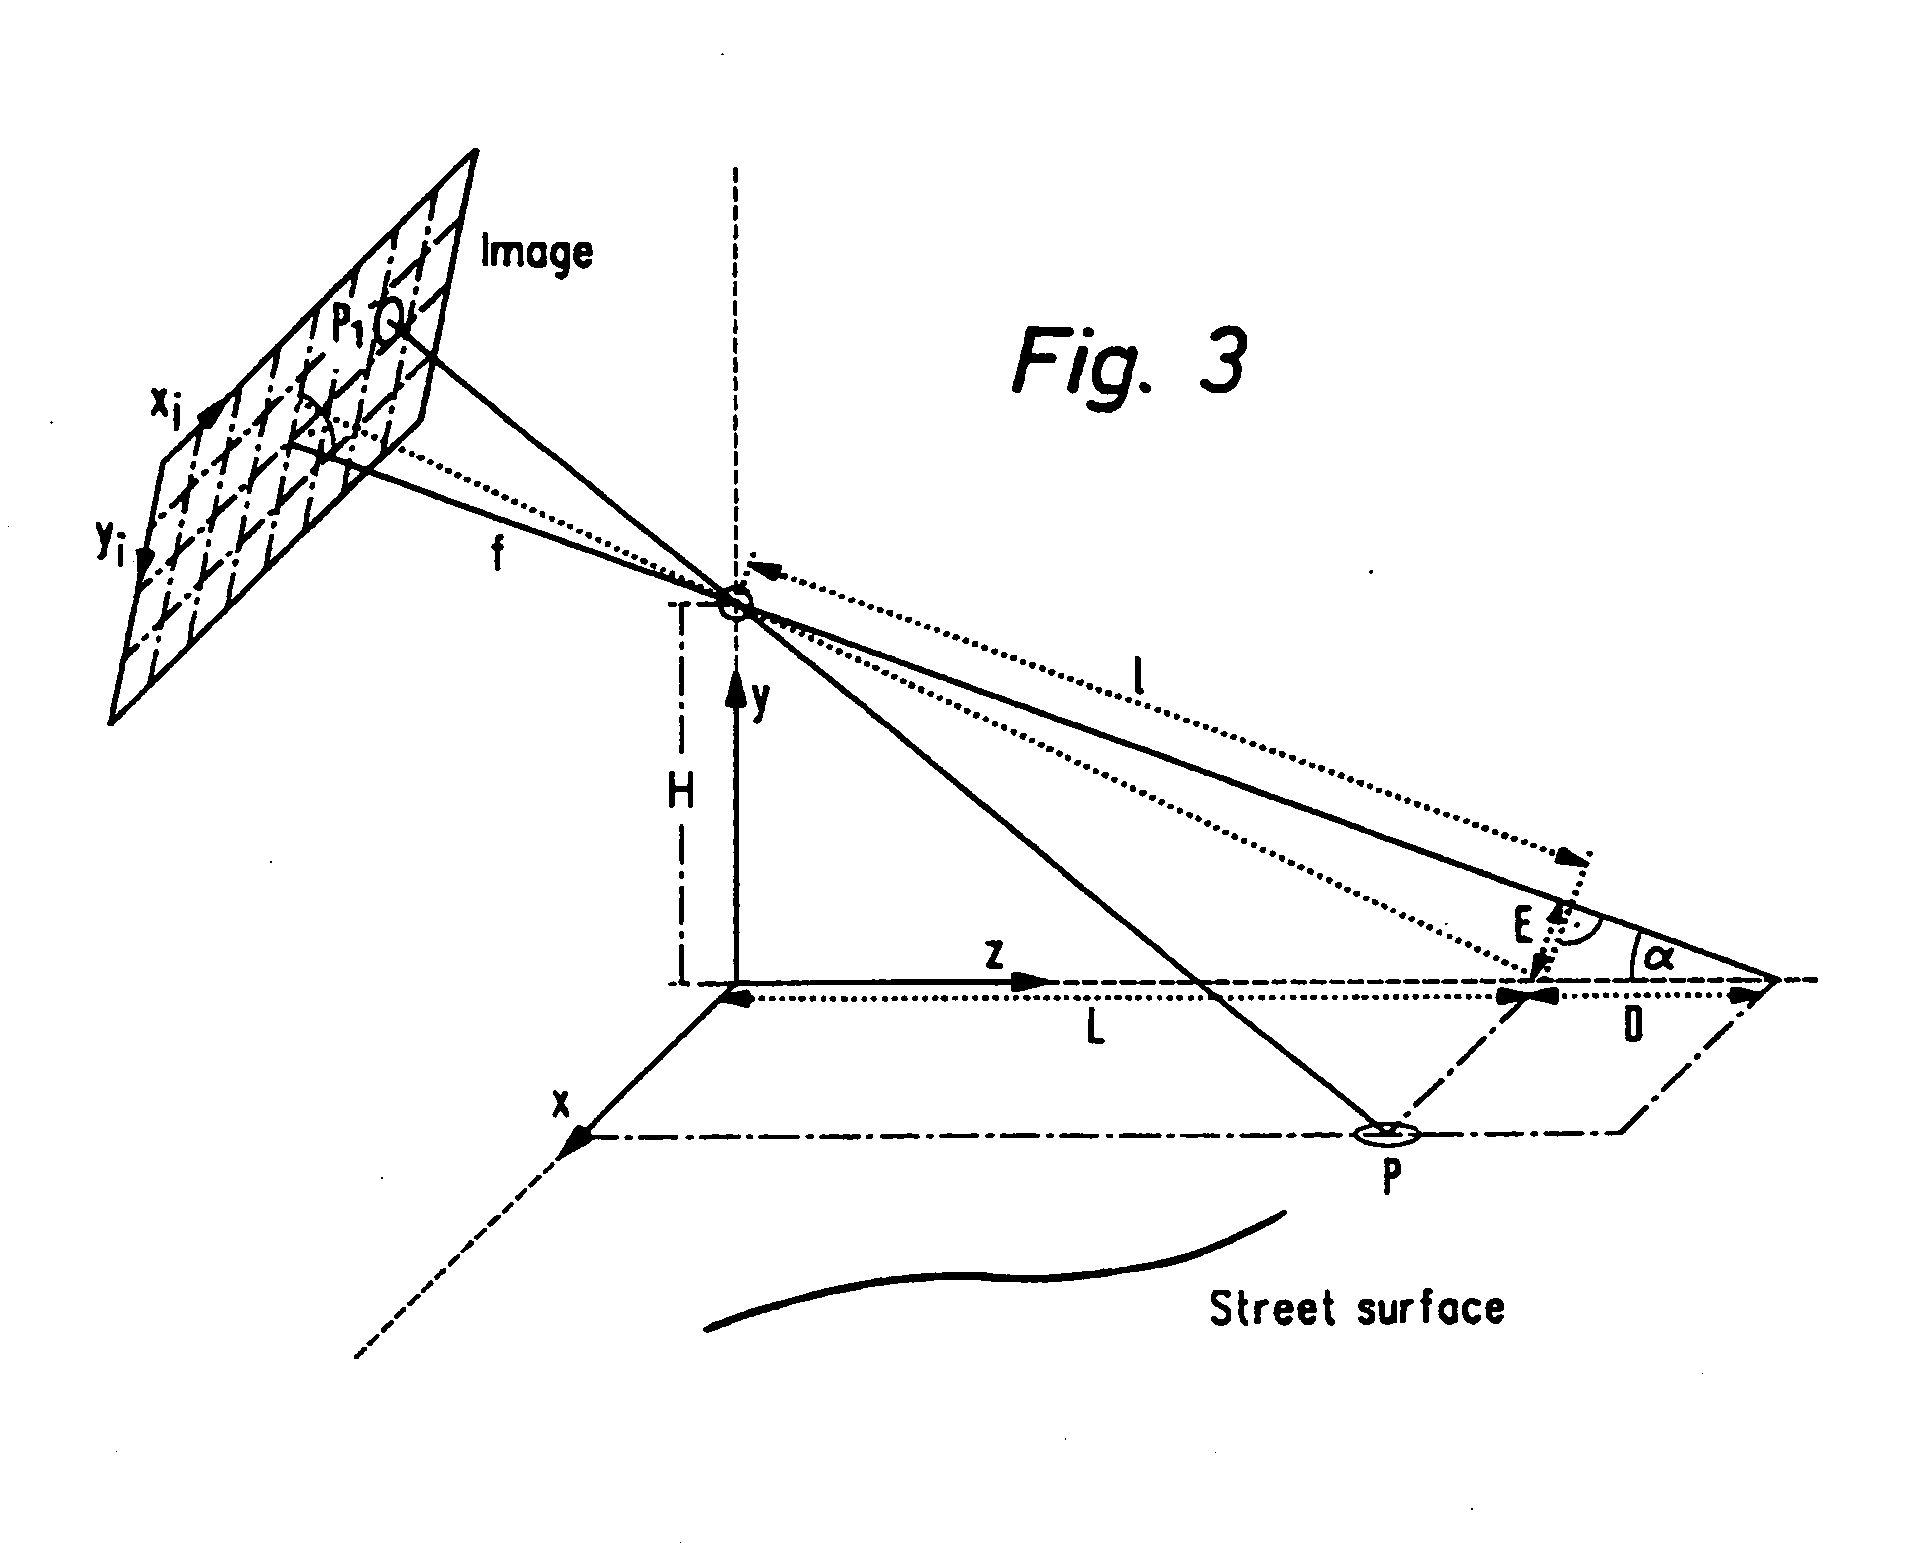 Camera based position recognition for a road vehicle